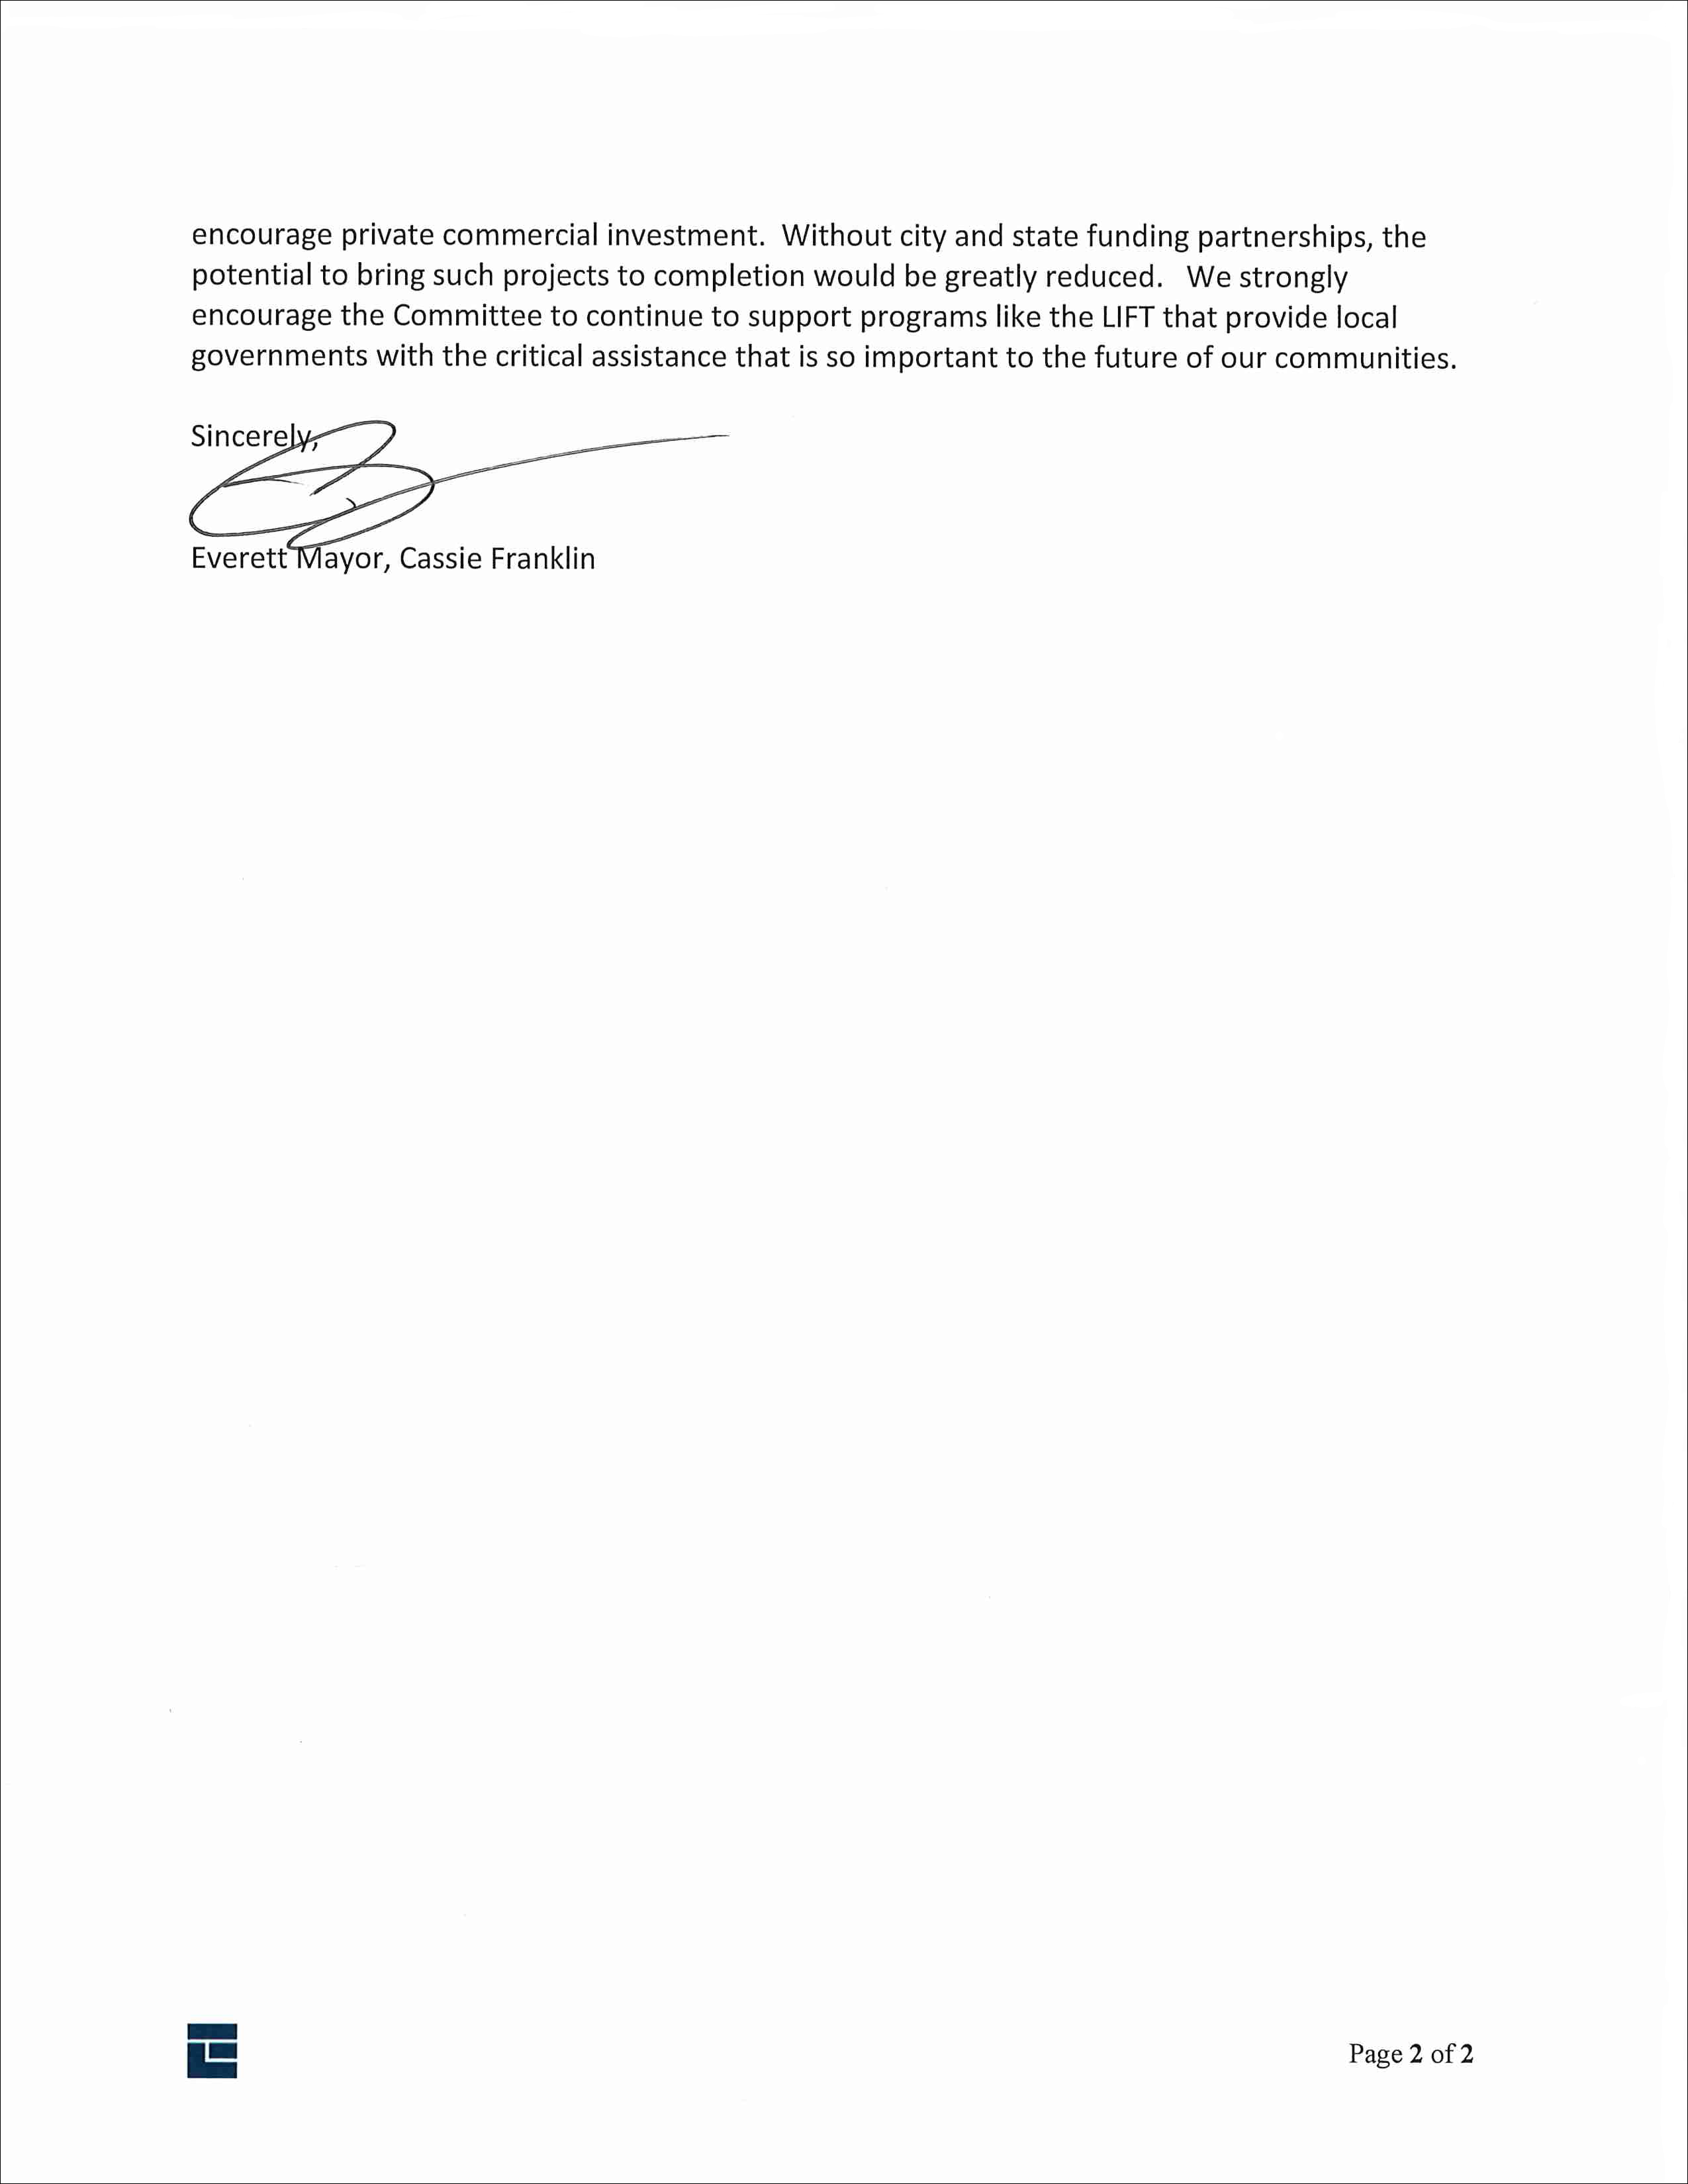 Page two of the City of Everett's response